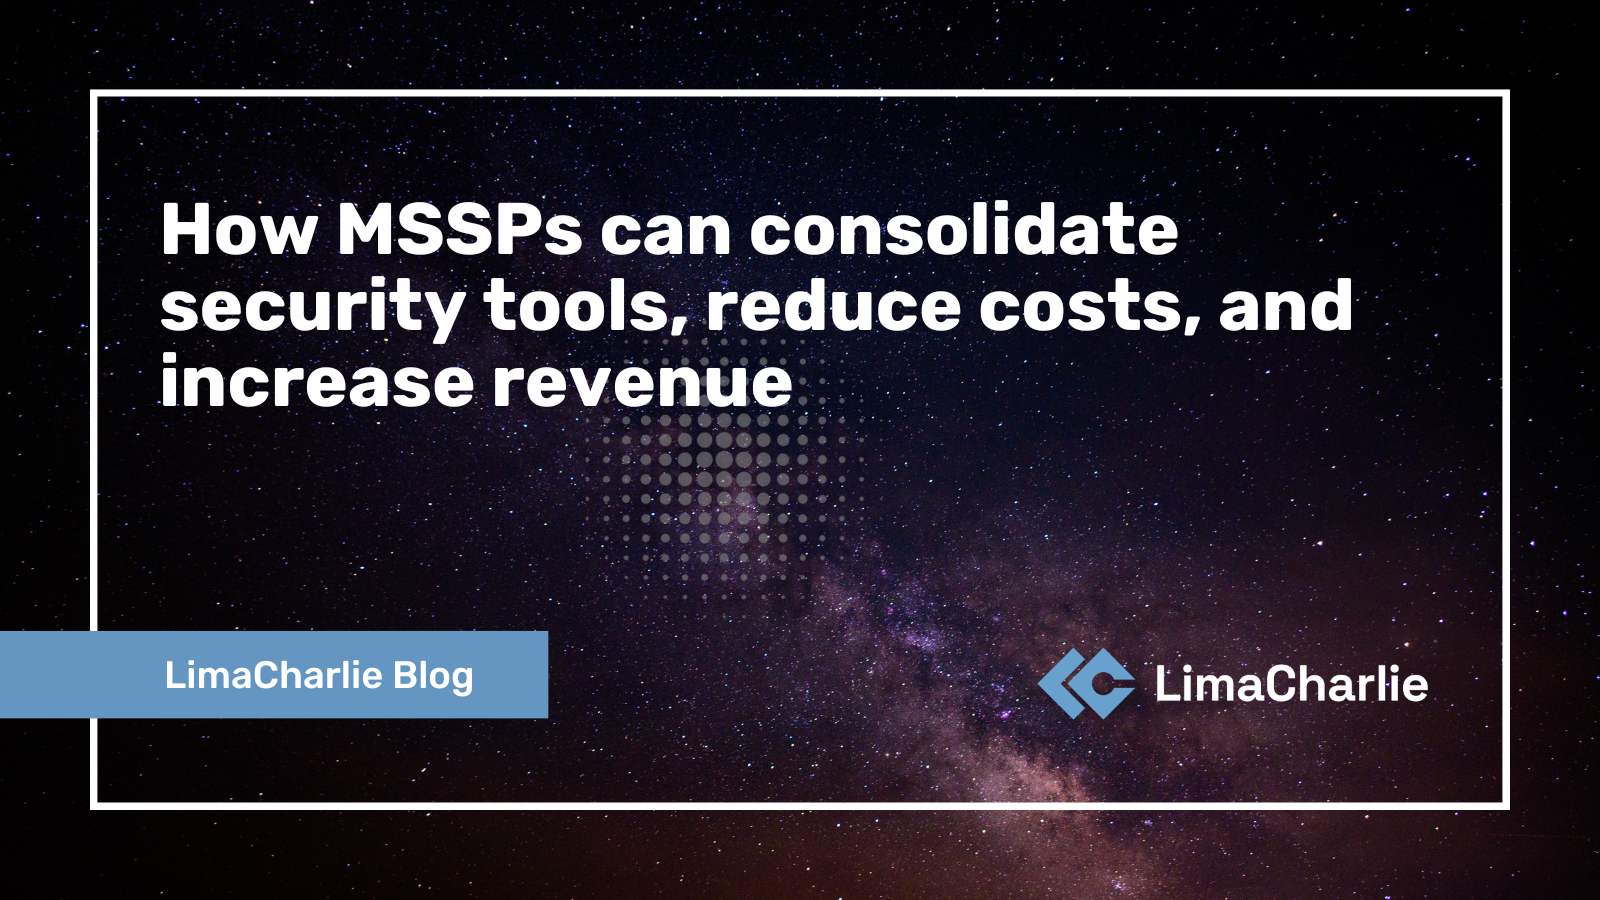 How MSSPs can consolidate security tools, reduce costs, and increase revenue